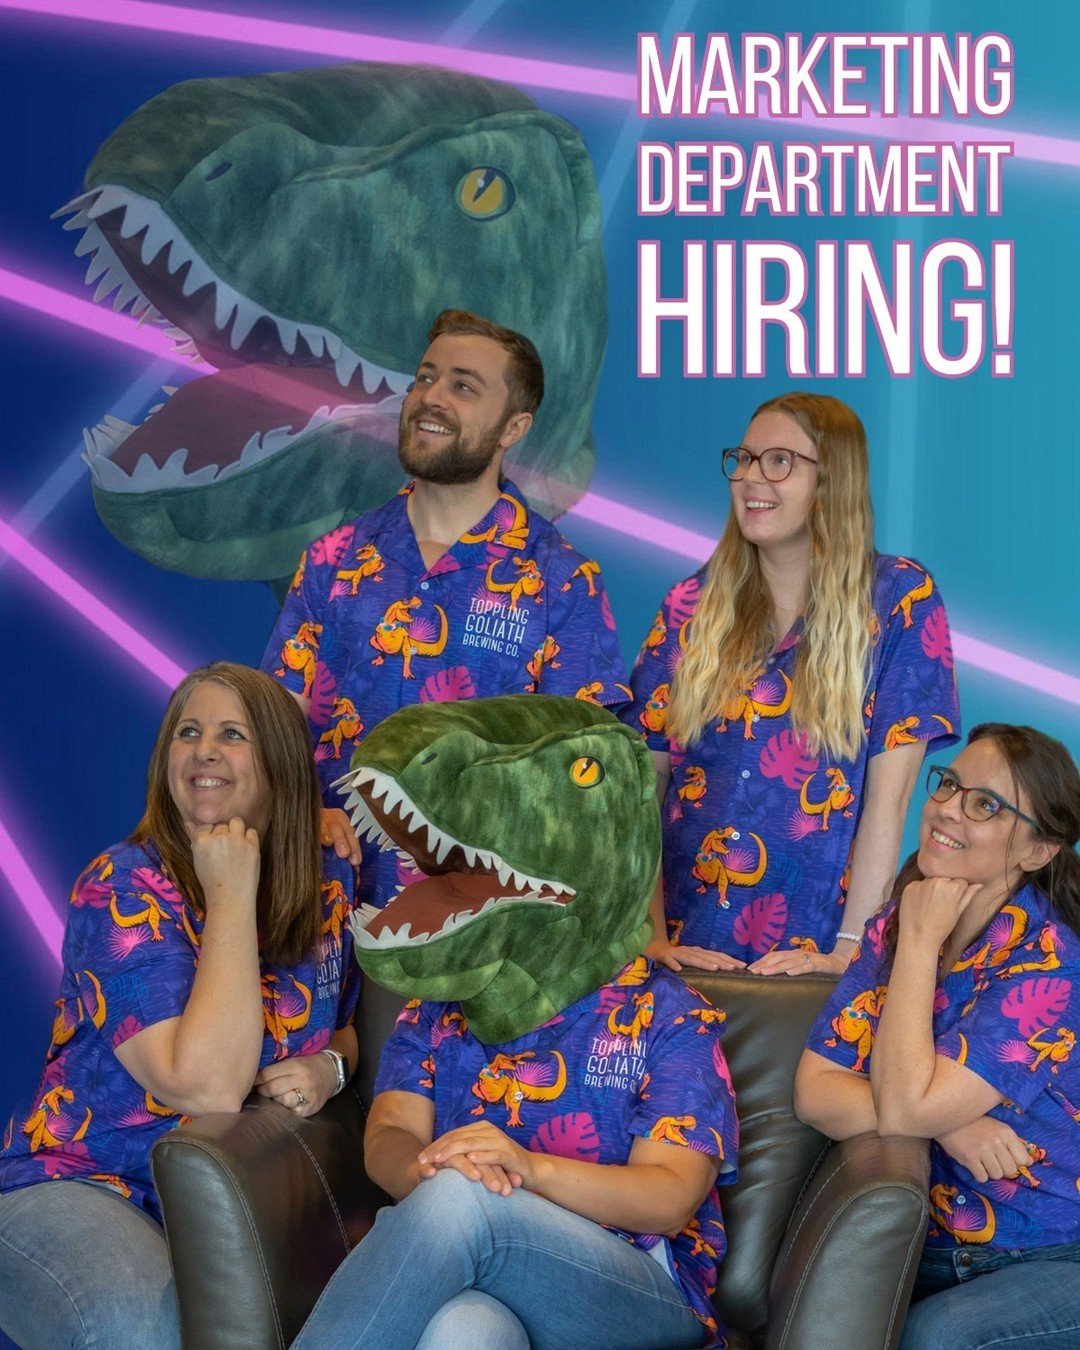 Don't make it awkward, join the team!

We're on the lookout for a Content Creator to join our Marketing Team! If you're a creative who loves creating captivating visuals &amp; connecting with audiences, we want to hear from you. Photography, graphic 